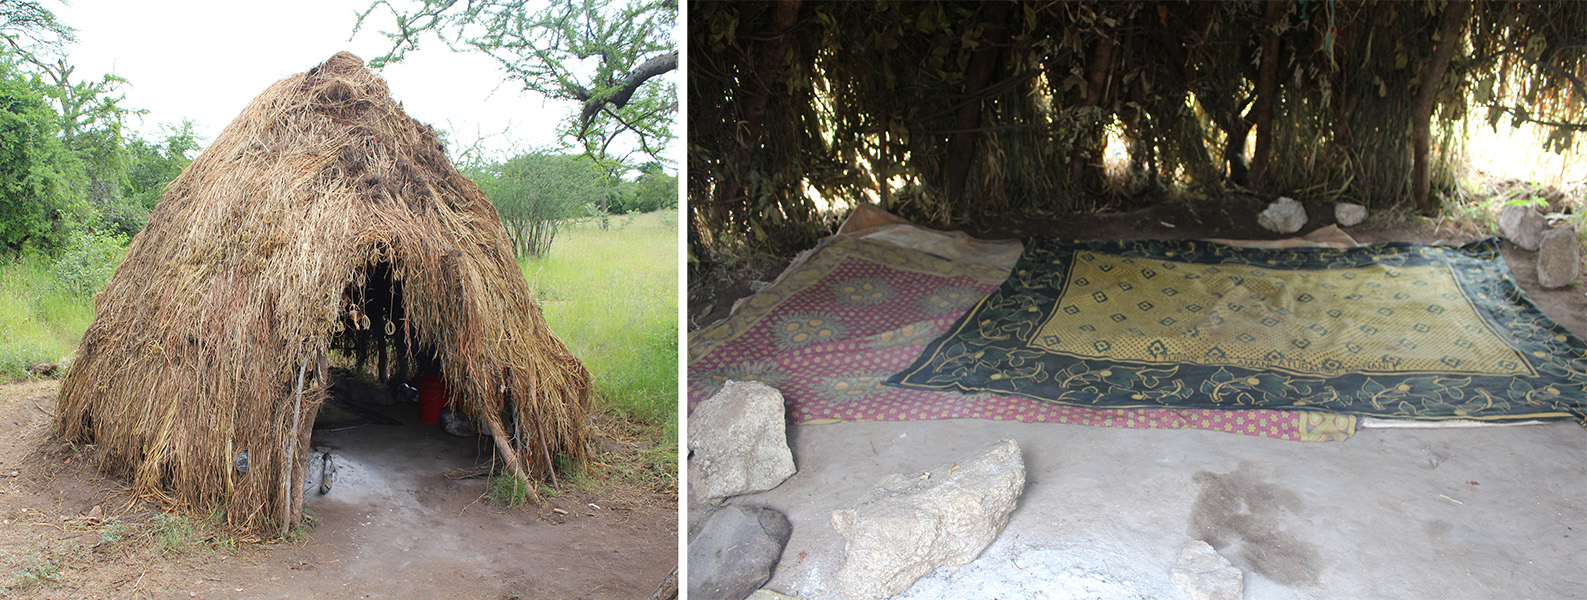 One photo shows a grass hut with an open doorway; the other shows a few rugs on the ground under the shade of a large tree.